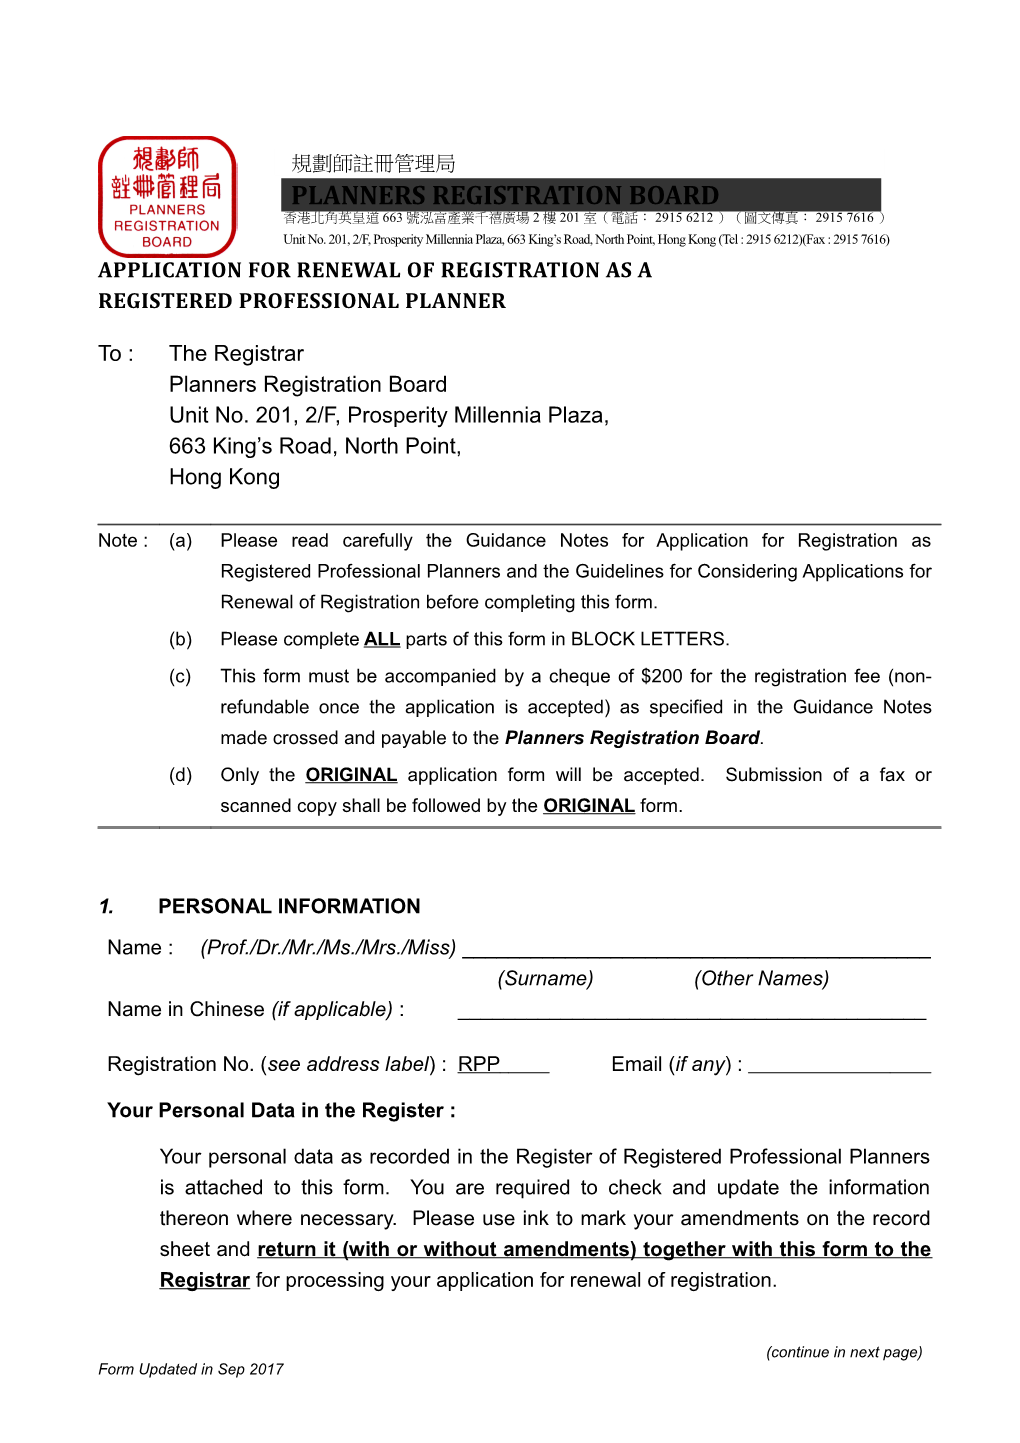 Application for Renewal of Registration As a RPP